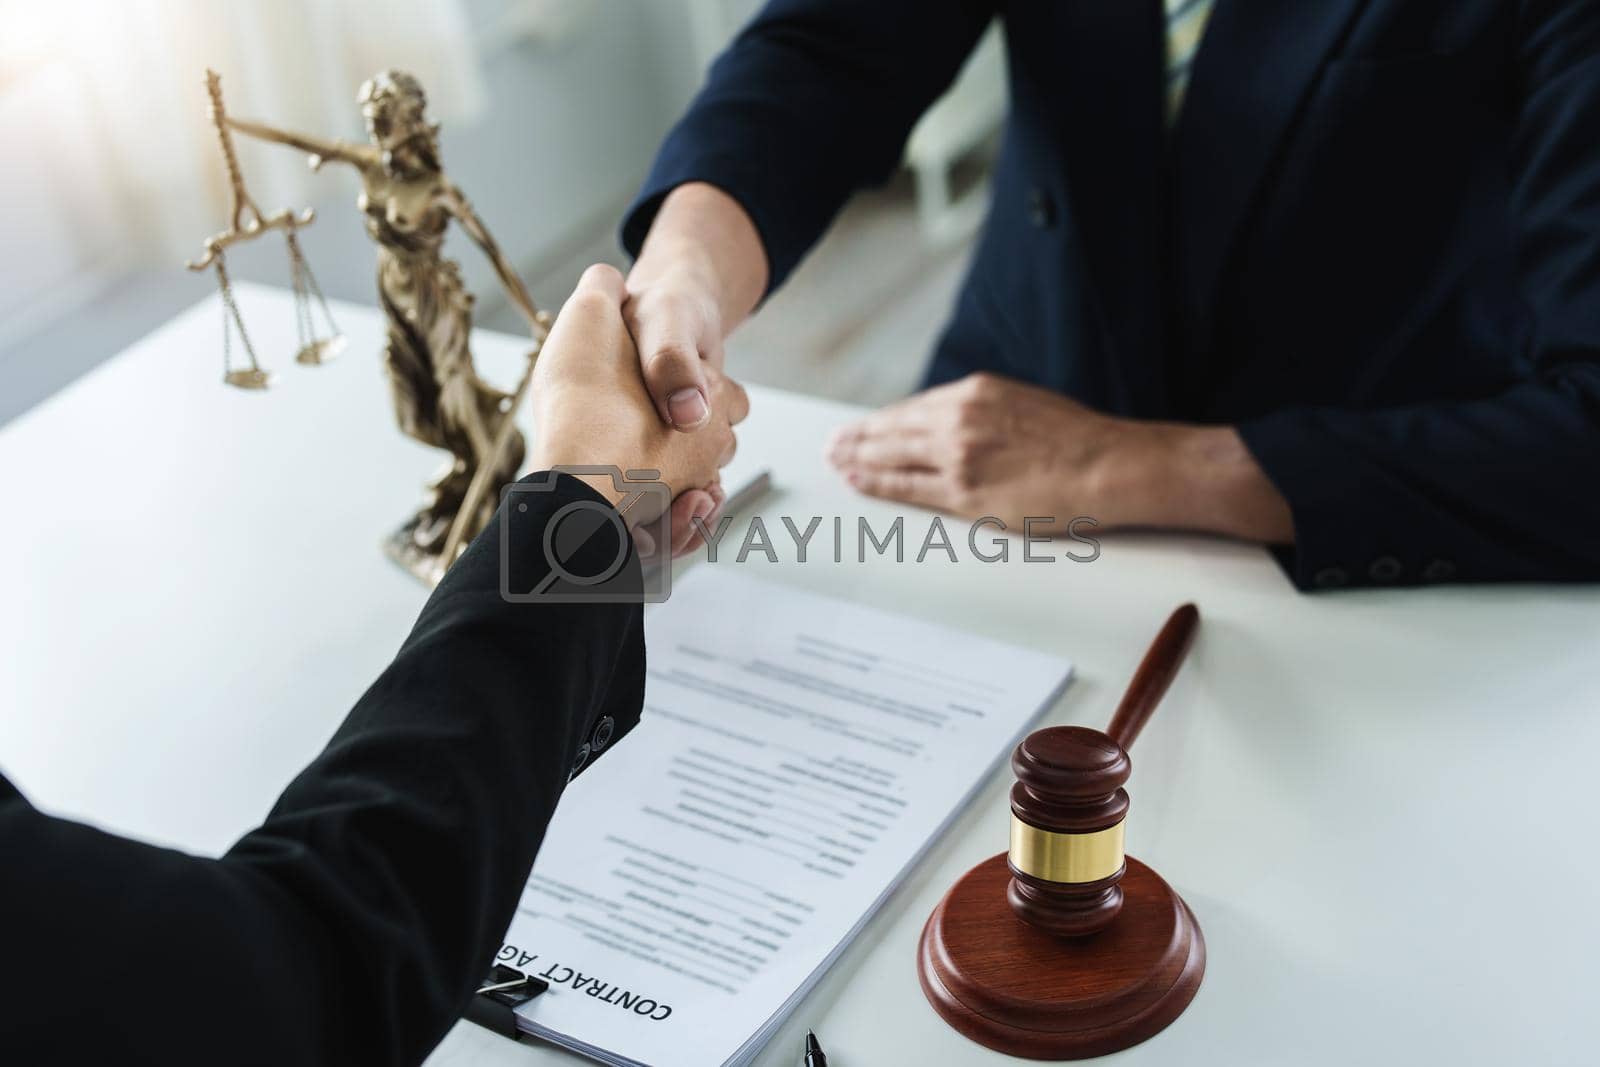 Royalty free image of Law, consultation, agreement, contract, lawyer or attorney shakes hands to agree on the client's offer to be hired to fight the parties in court. by Manastrong